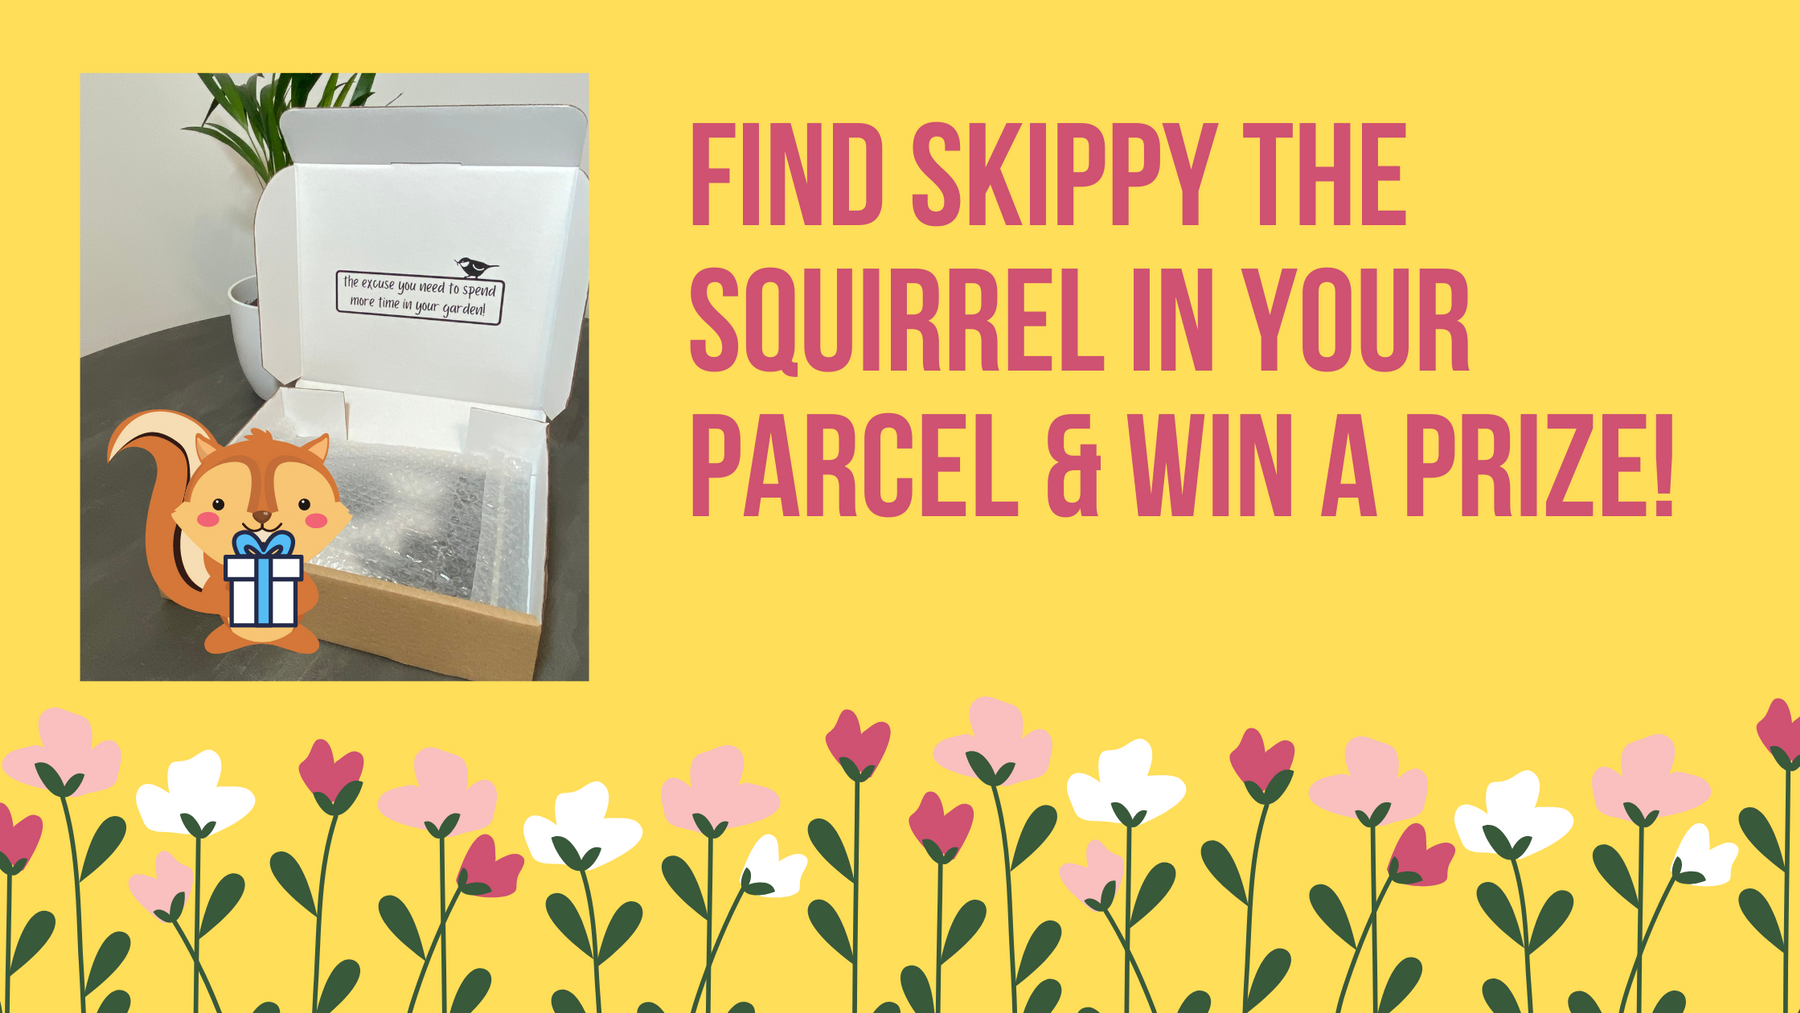 Find Skippy the Squirrel in your parcel and WIN a PRIZE!